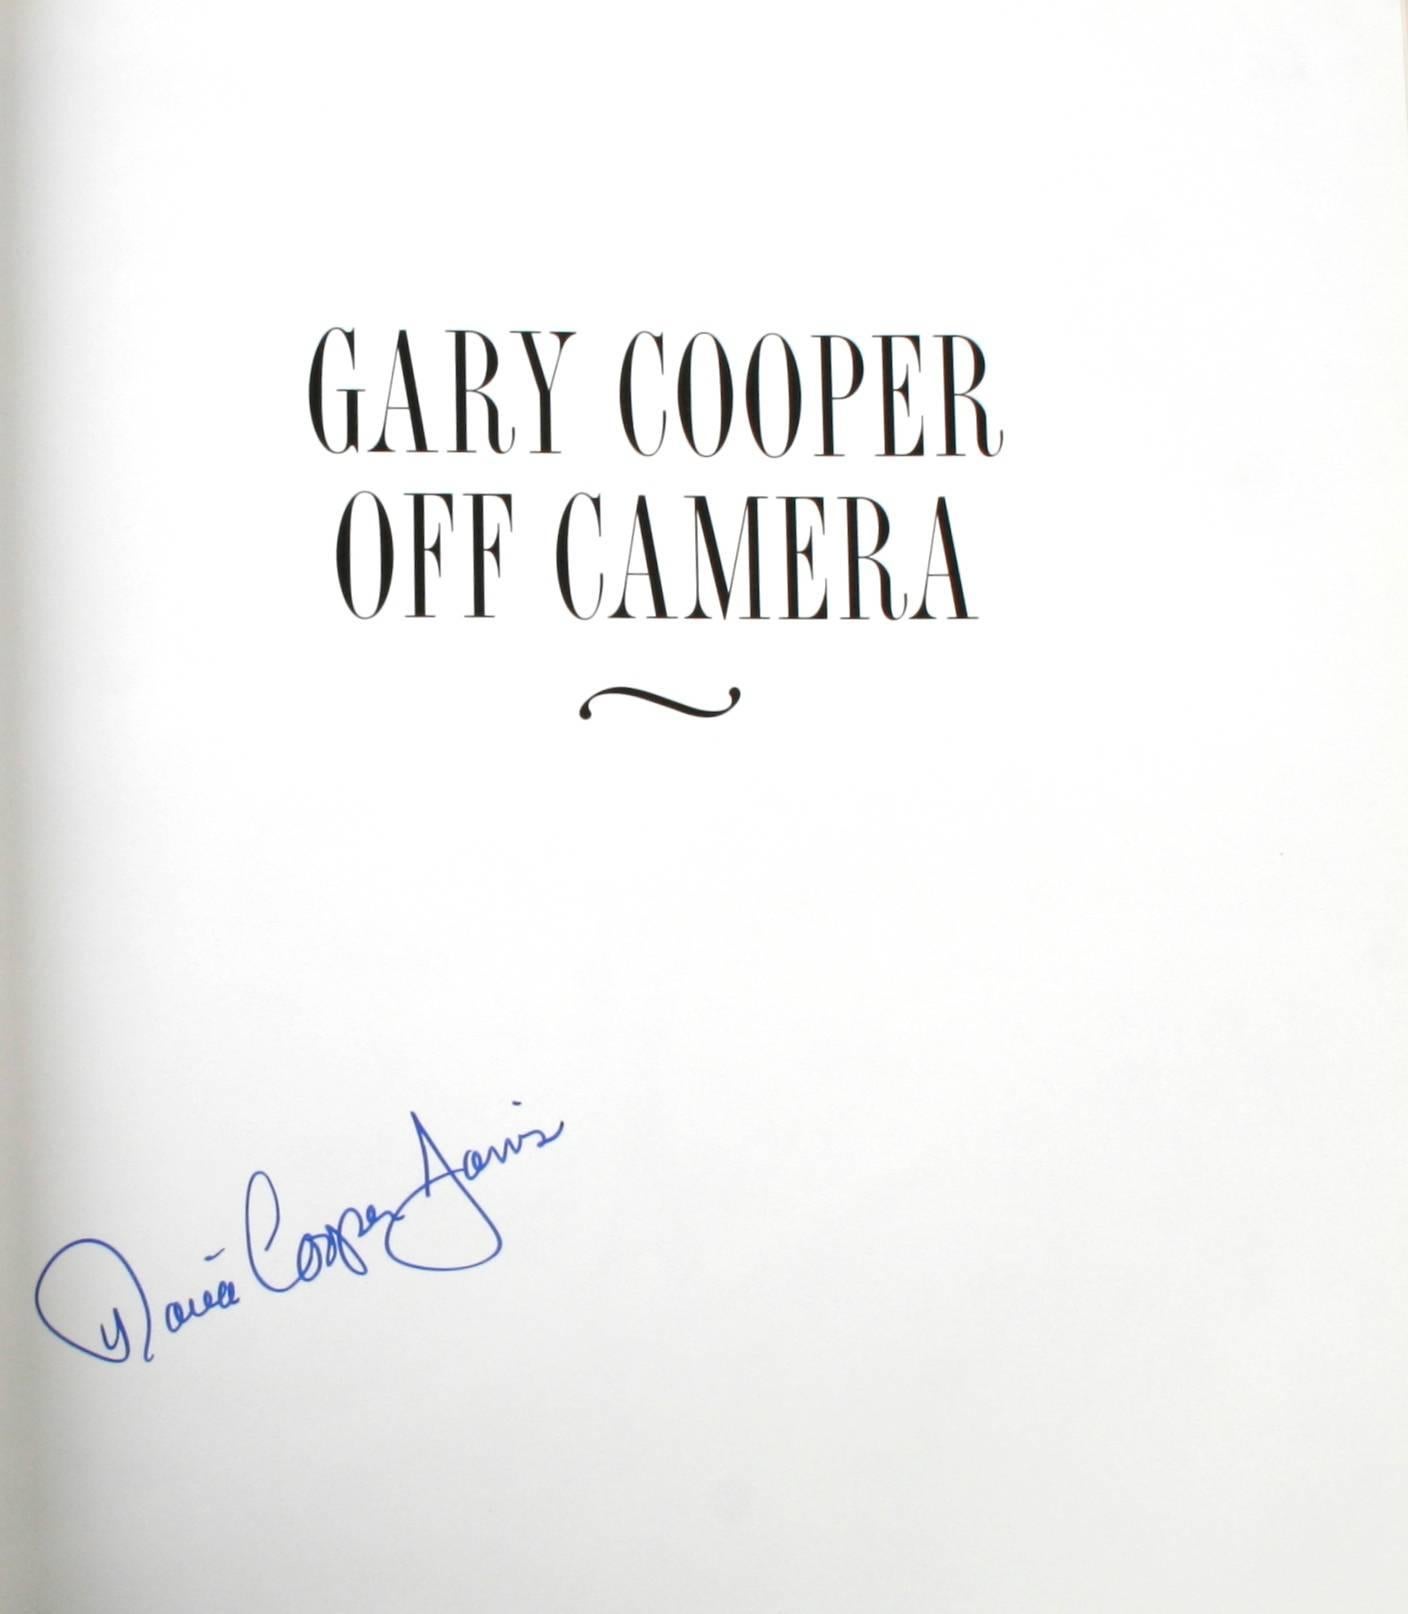 Gary Cooper Off Camera, A Daughter Remembers by Maria Cooper Janis. New York: Harry N. Abrams, Inc., 1999. Signed first edition hardcover with dust jacket. 175 pp. A moving tribute to Gary Cooper by his daughter Maria. Off camera Cooper was a